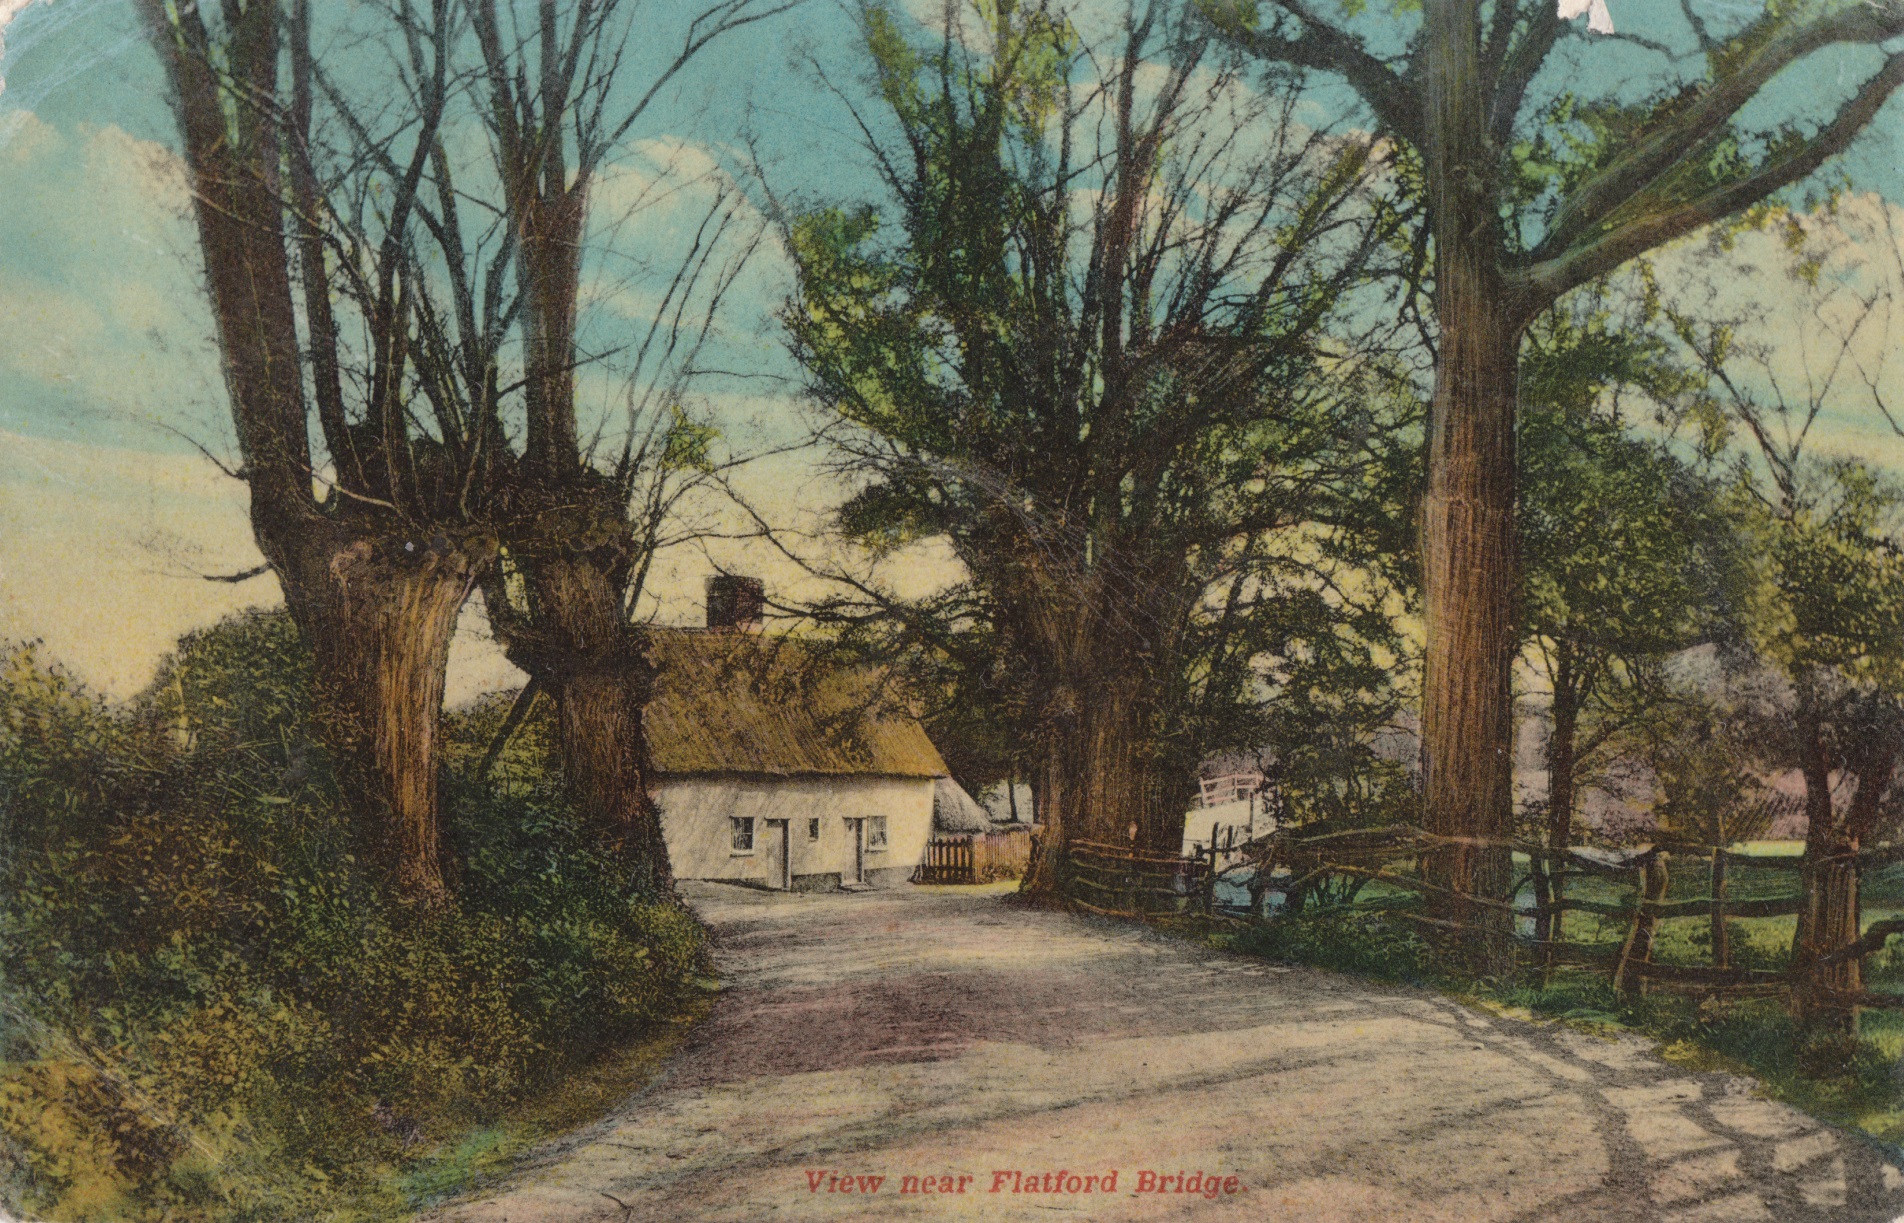 Bridge Cottage, Flatford<br>From a postcard sent in July 1914<br />Author's Collection